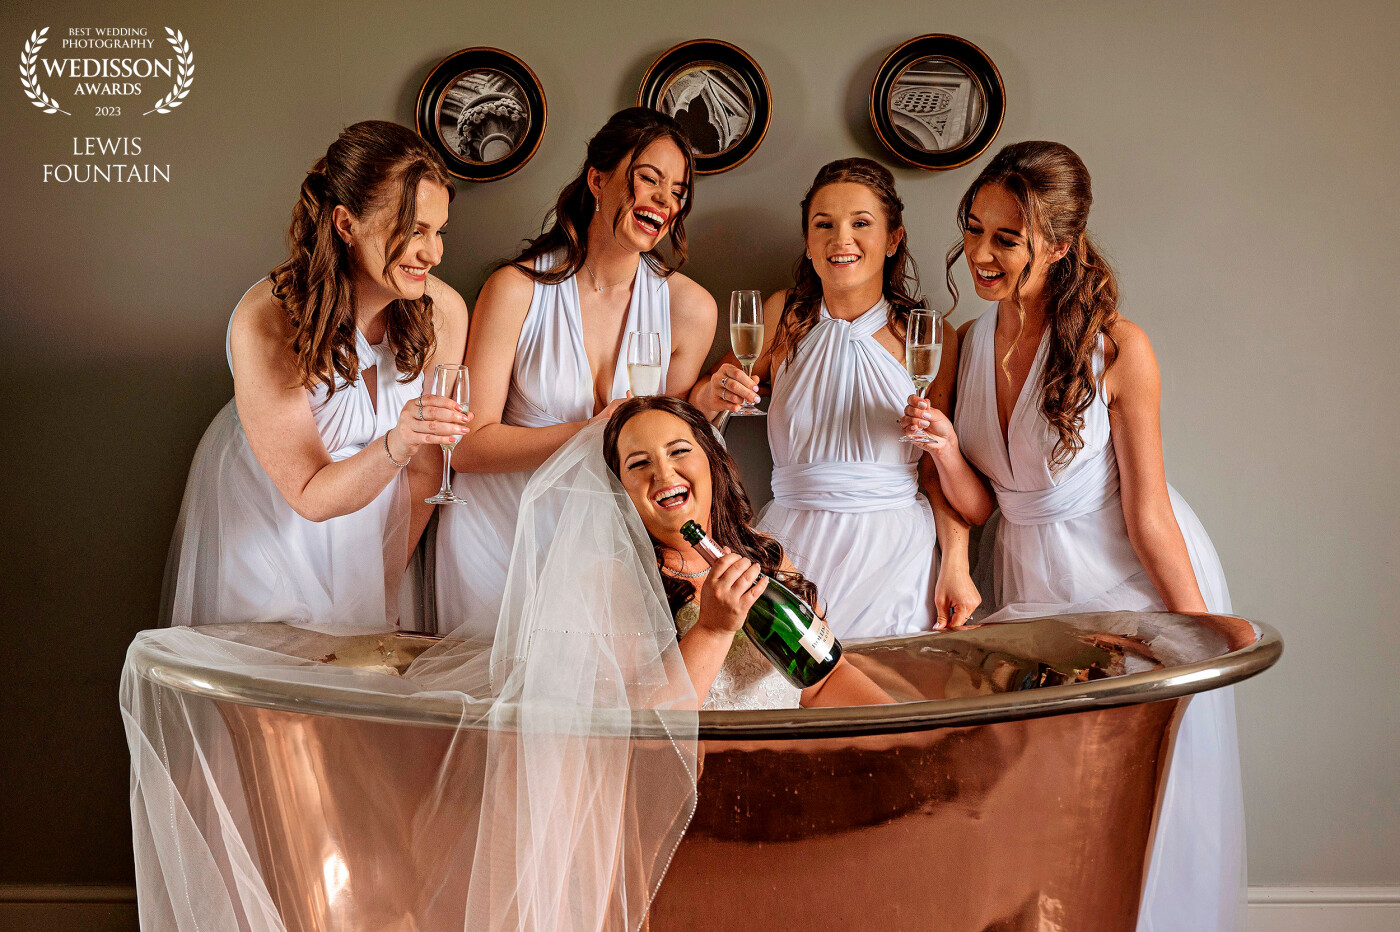 The copper style baths at Poets House always get called in to action when the bridal party are having fun. <br />
<br />
Megan and her girls rocked this shot just before we left for the ceremony 🤘